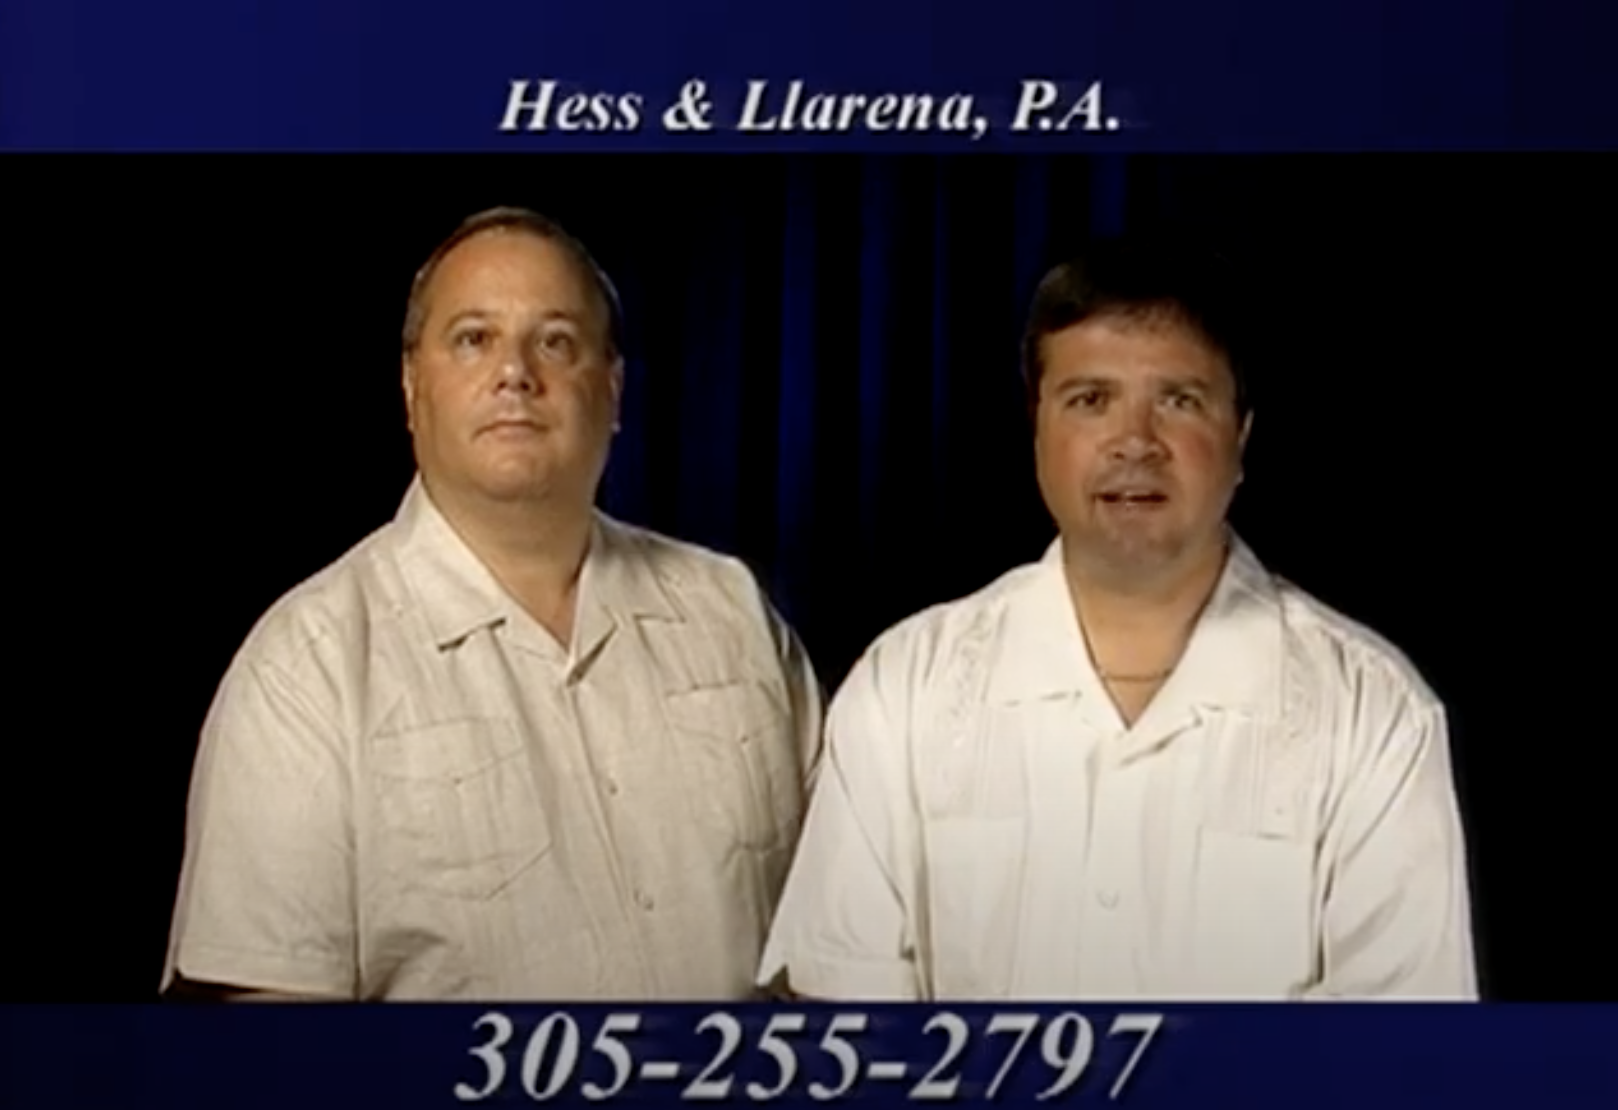 Hess and Llarena partners with phone number 3052552797